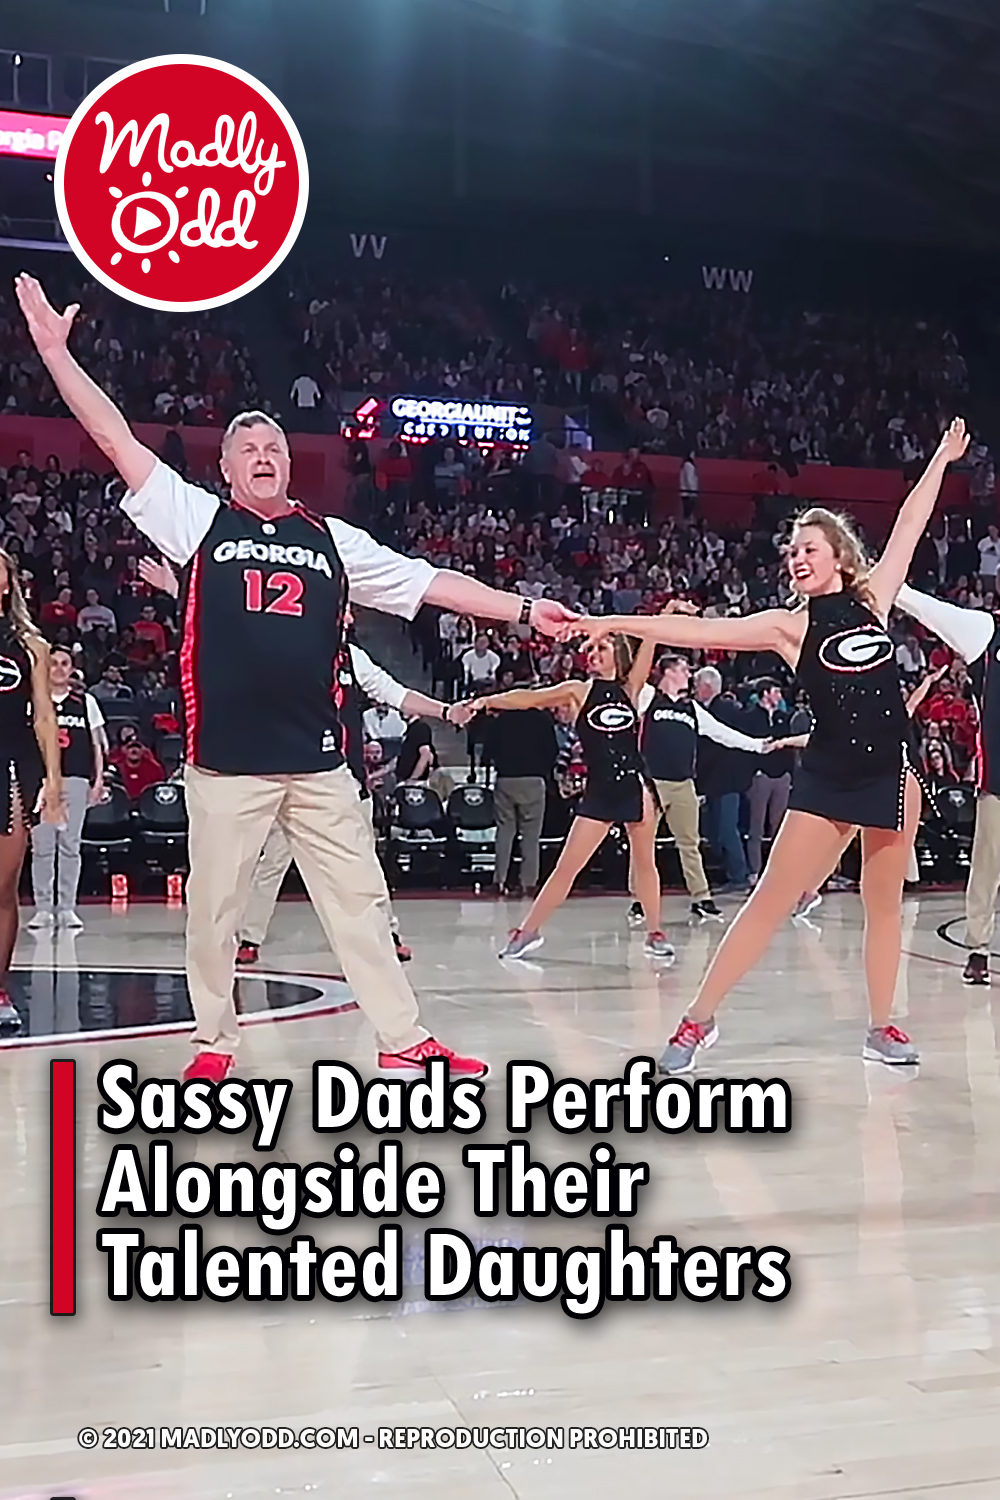 Sassy Dads Perform Alongside Their Talented Daughters